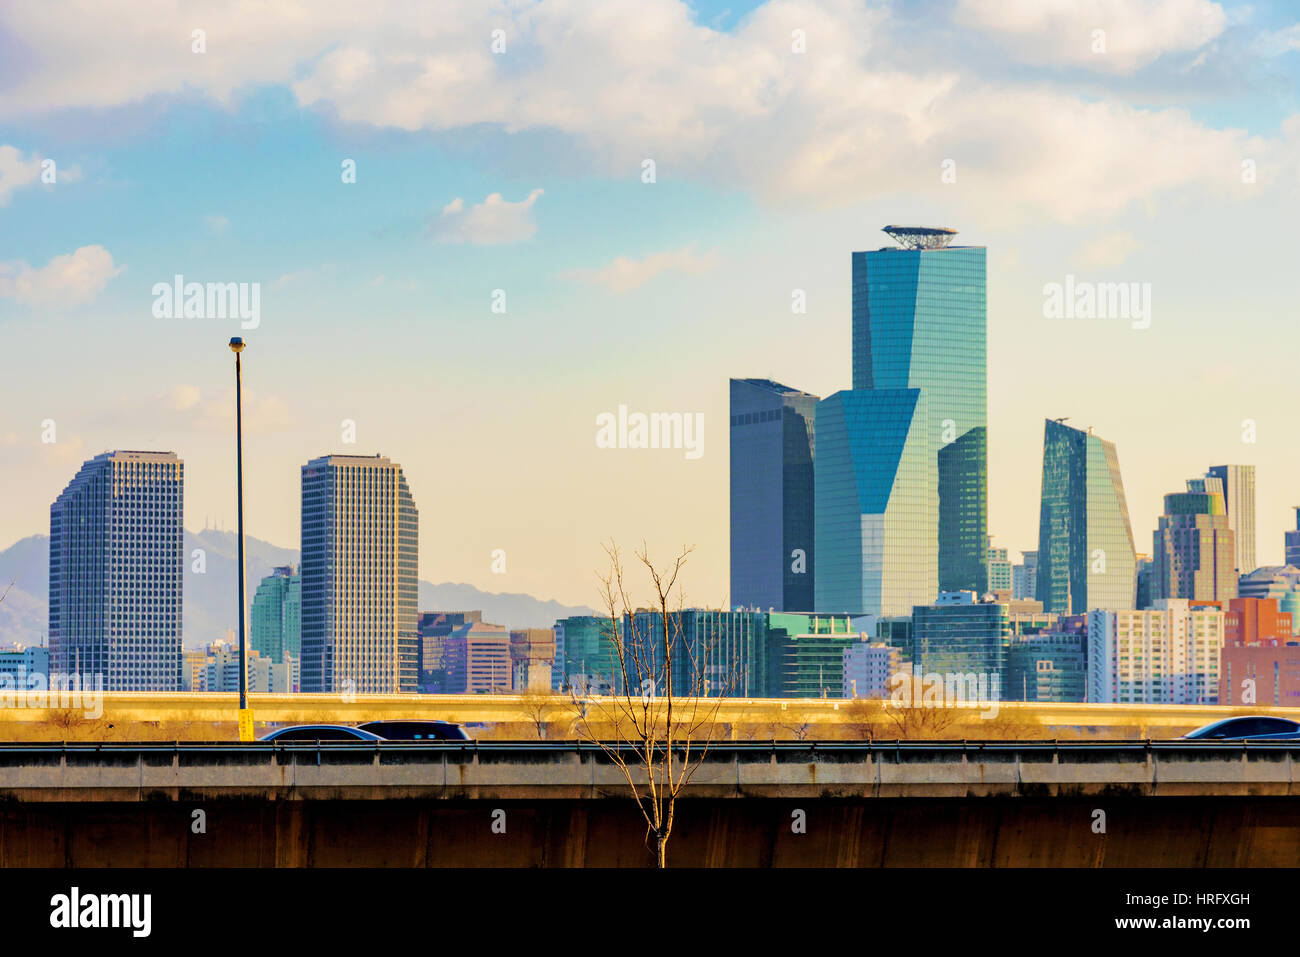 Yeouido financial district skyline with cars Stock Photo